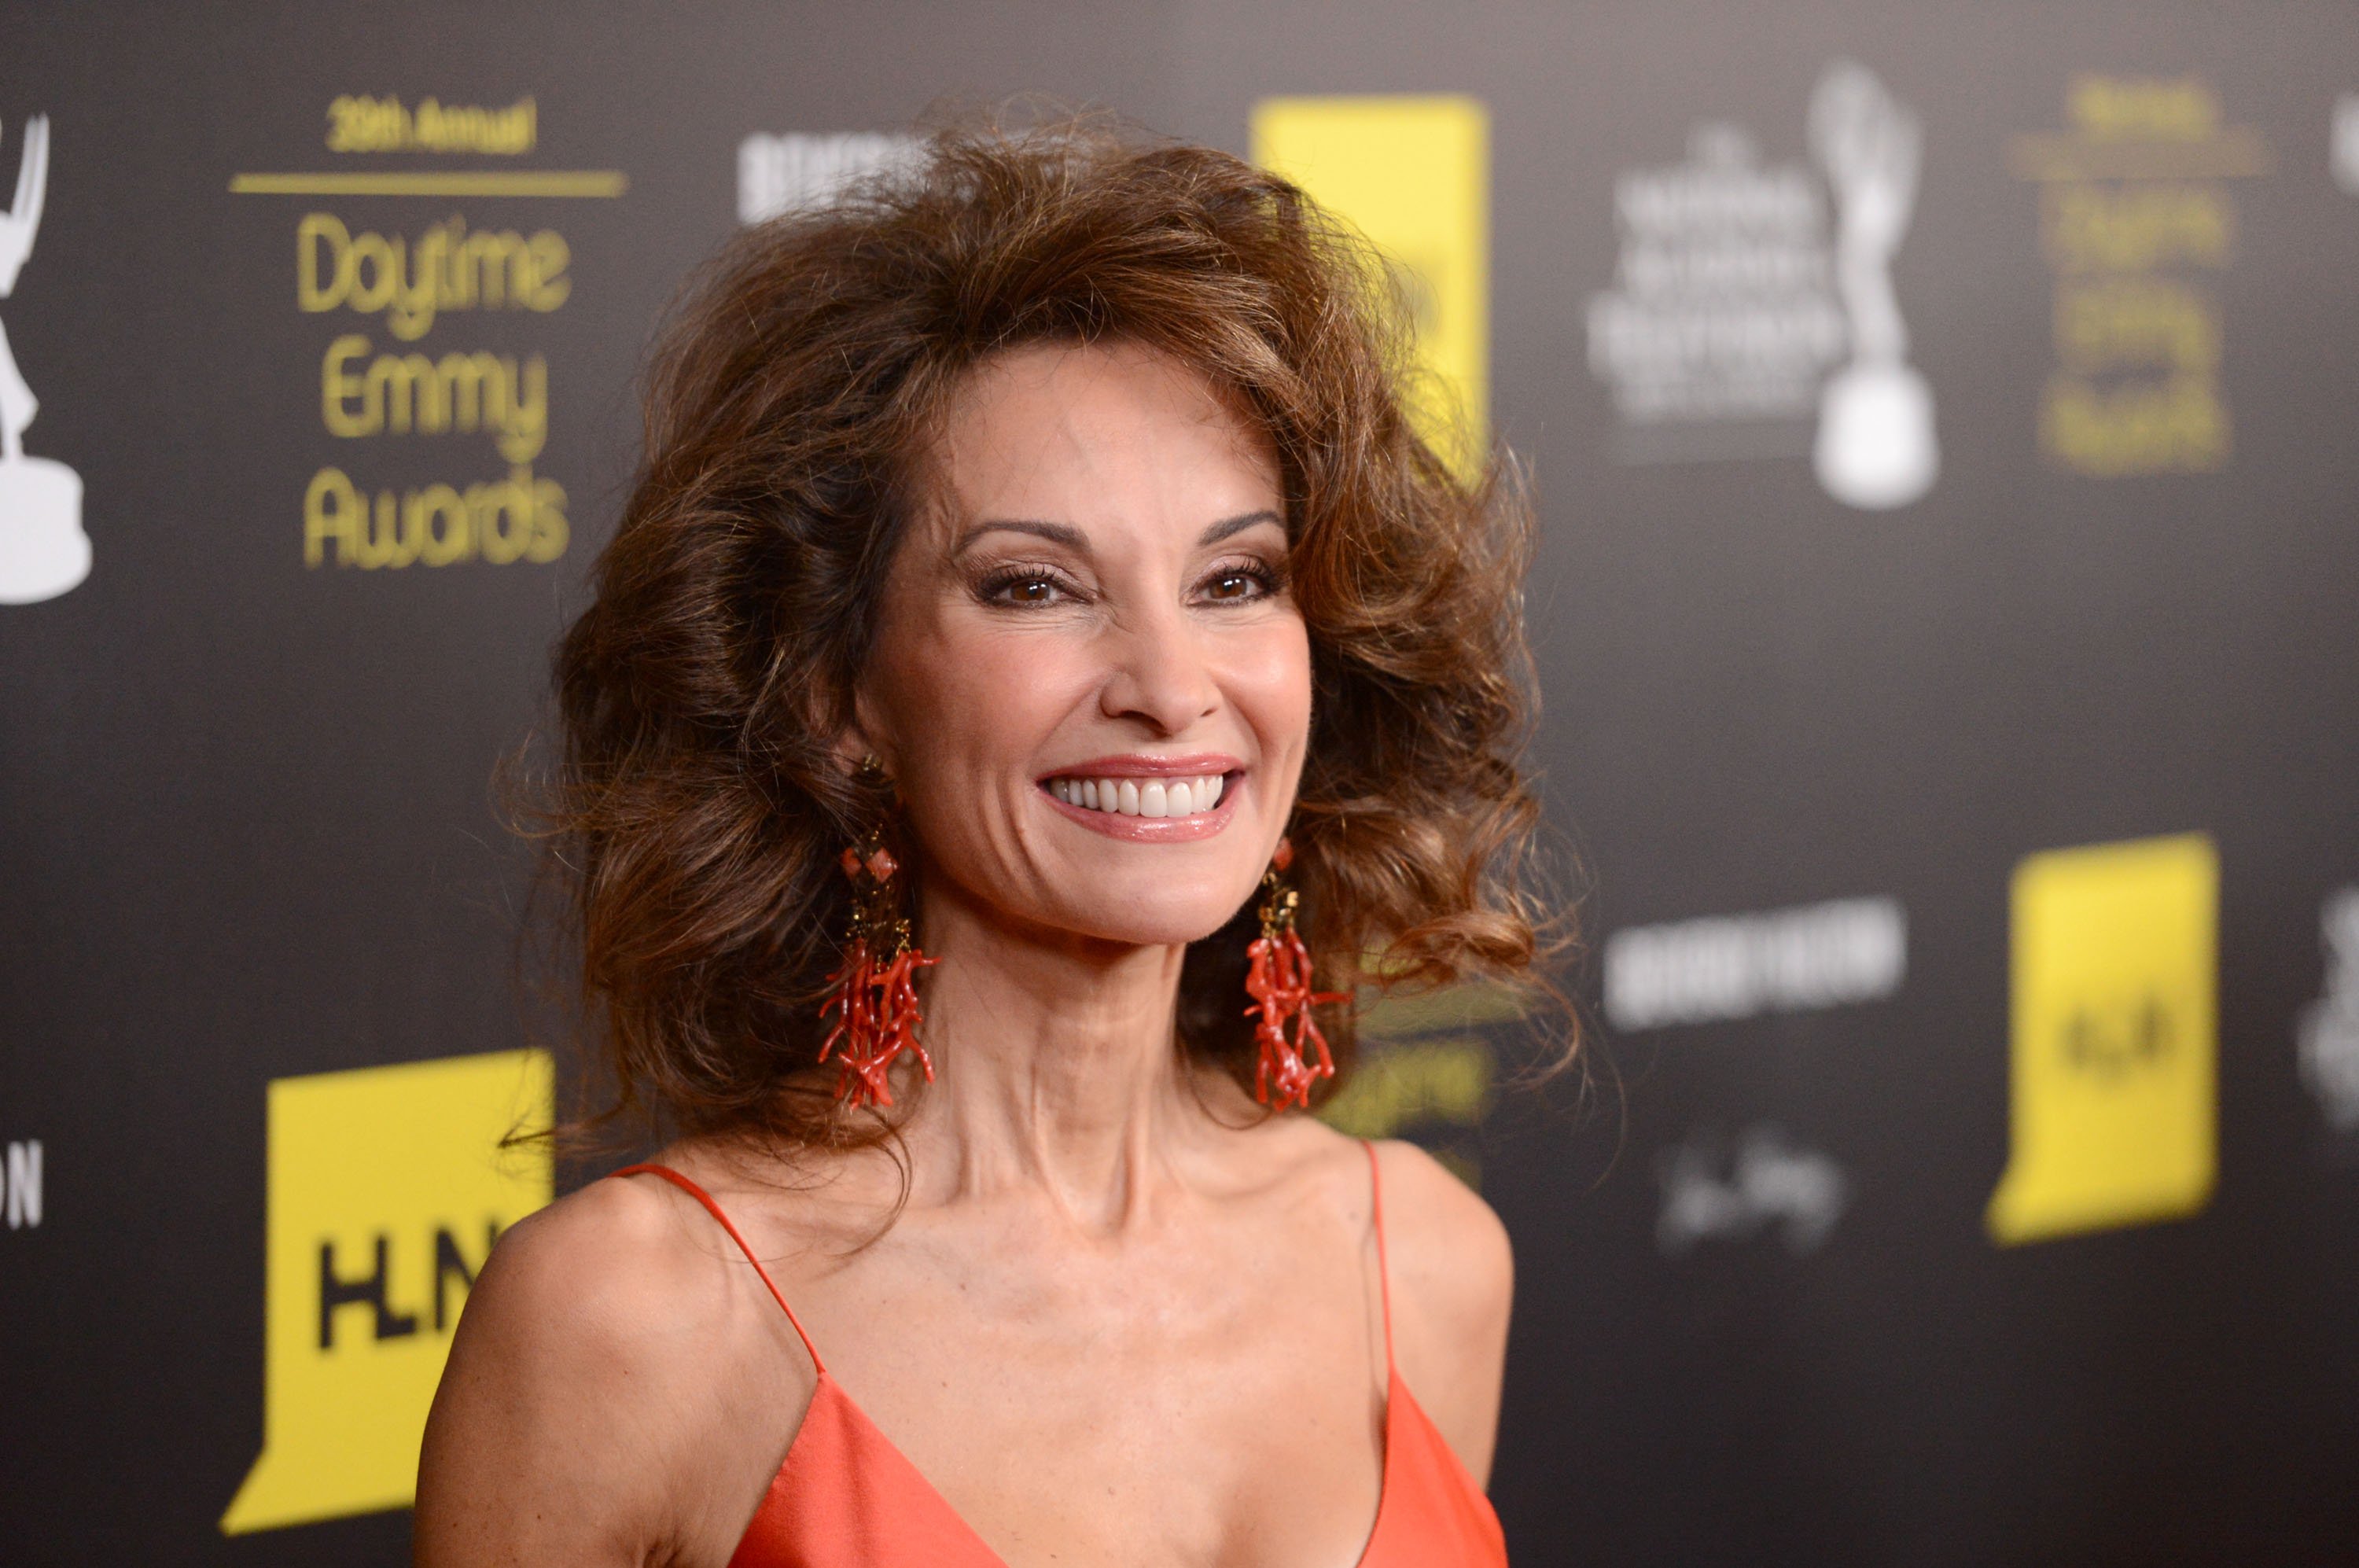 Susan Lucci pictured at The 39th Annual Daytime Emmy Awards broadcasted on HLN, 2012, Beverly Hills, California. | Photo: Getty Images